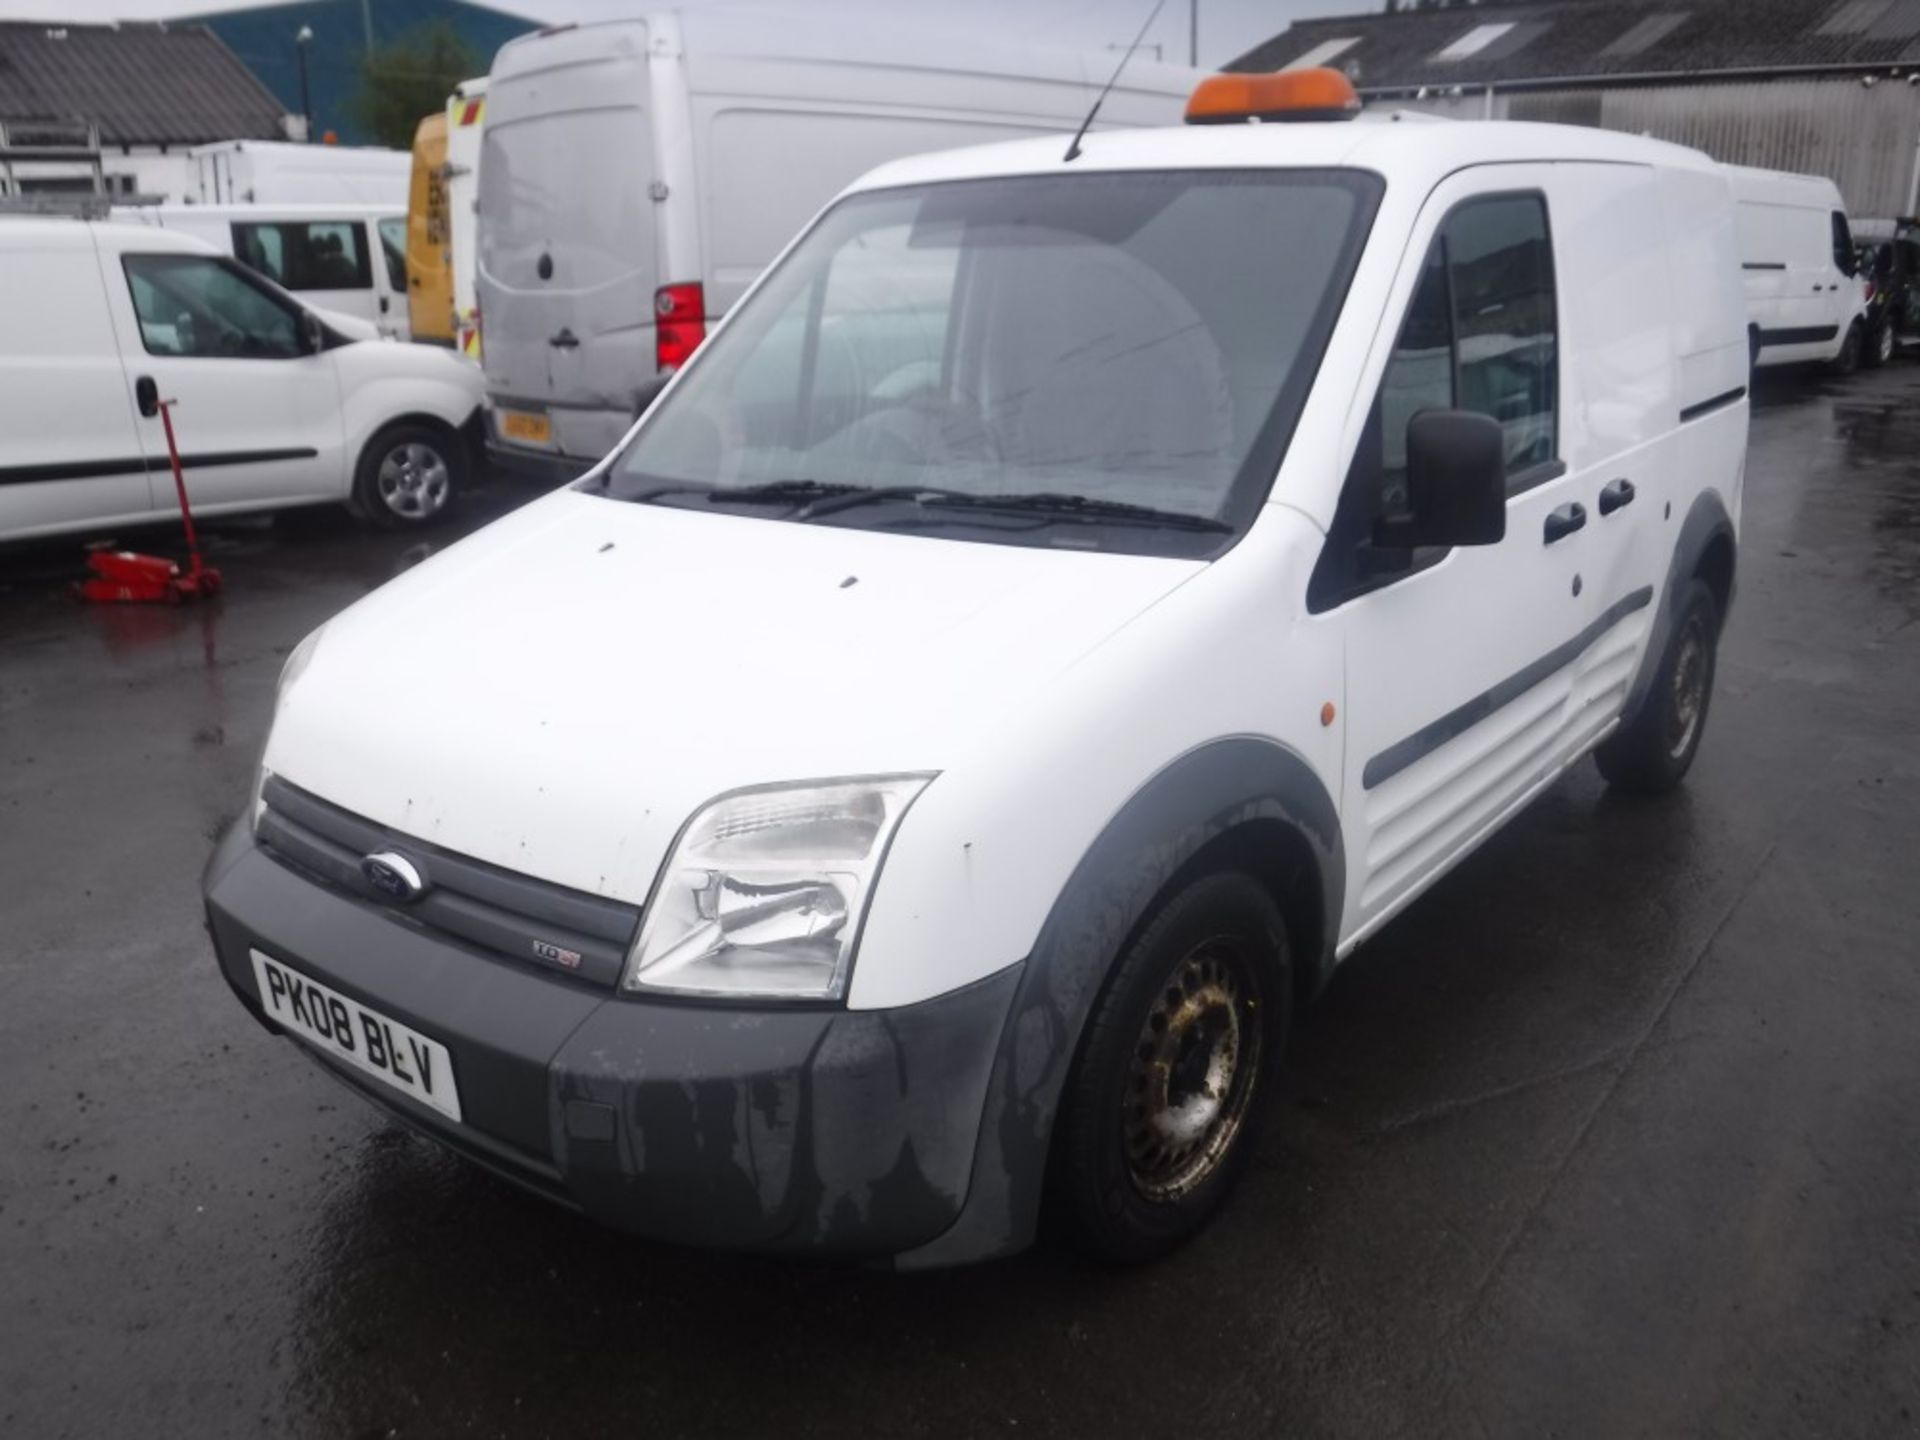 08 reg FORD TRANSIT CONNECT T200 L75 (DIRECT COUNCIL) 1ST REG 03/08, TEST 08/18, 147445M, V5 HERE, 1 - Image 2 of 5